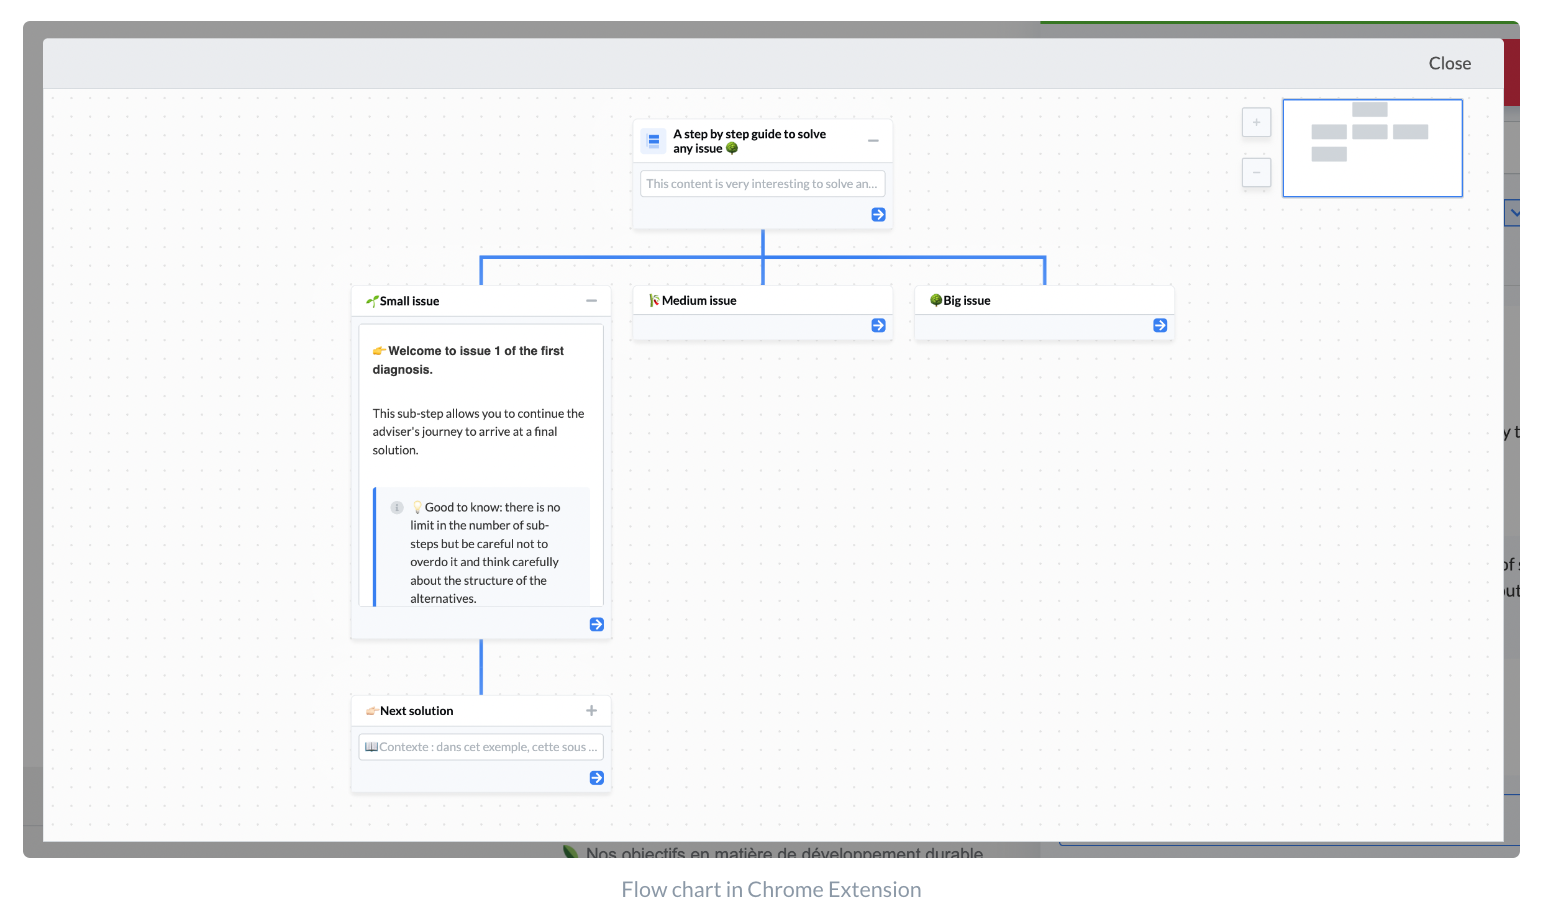 Flow chart in Chrome Extension